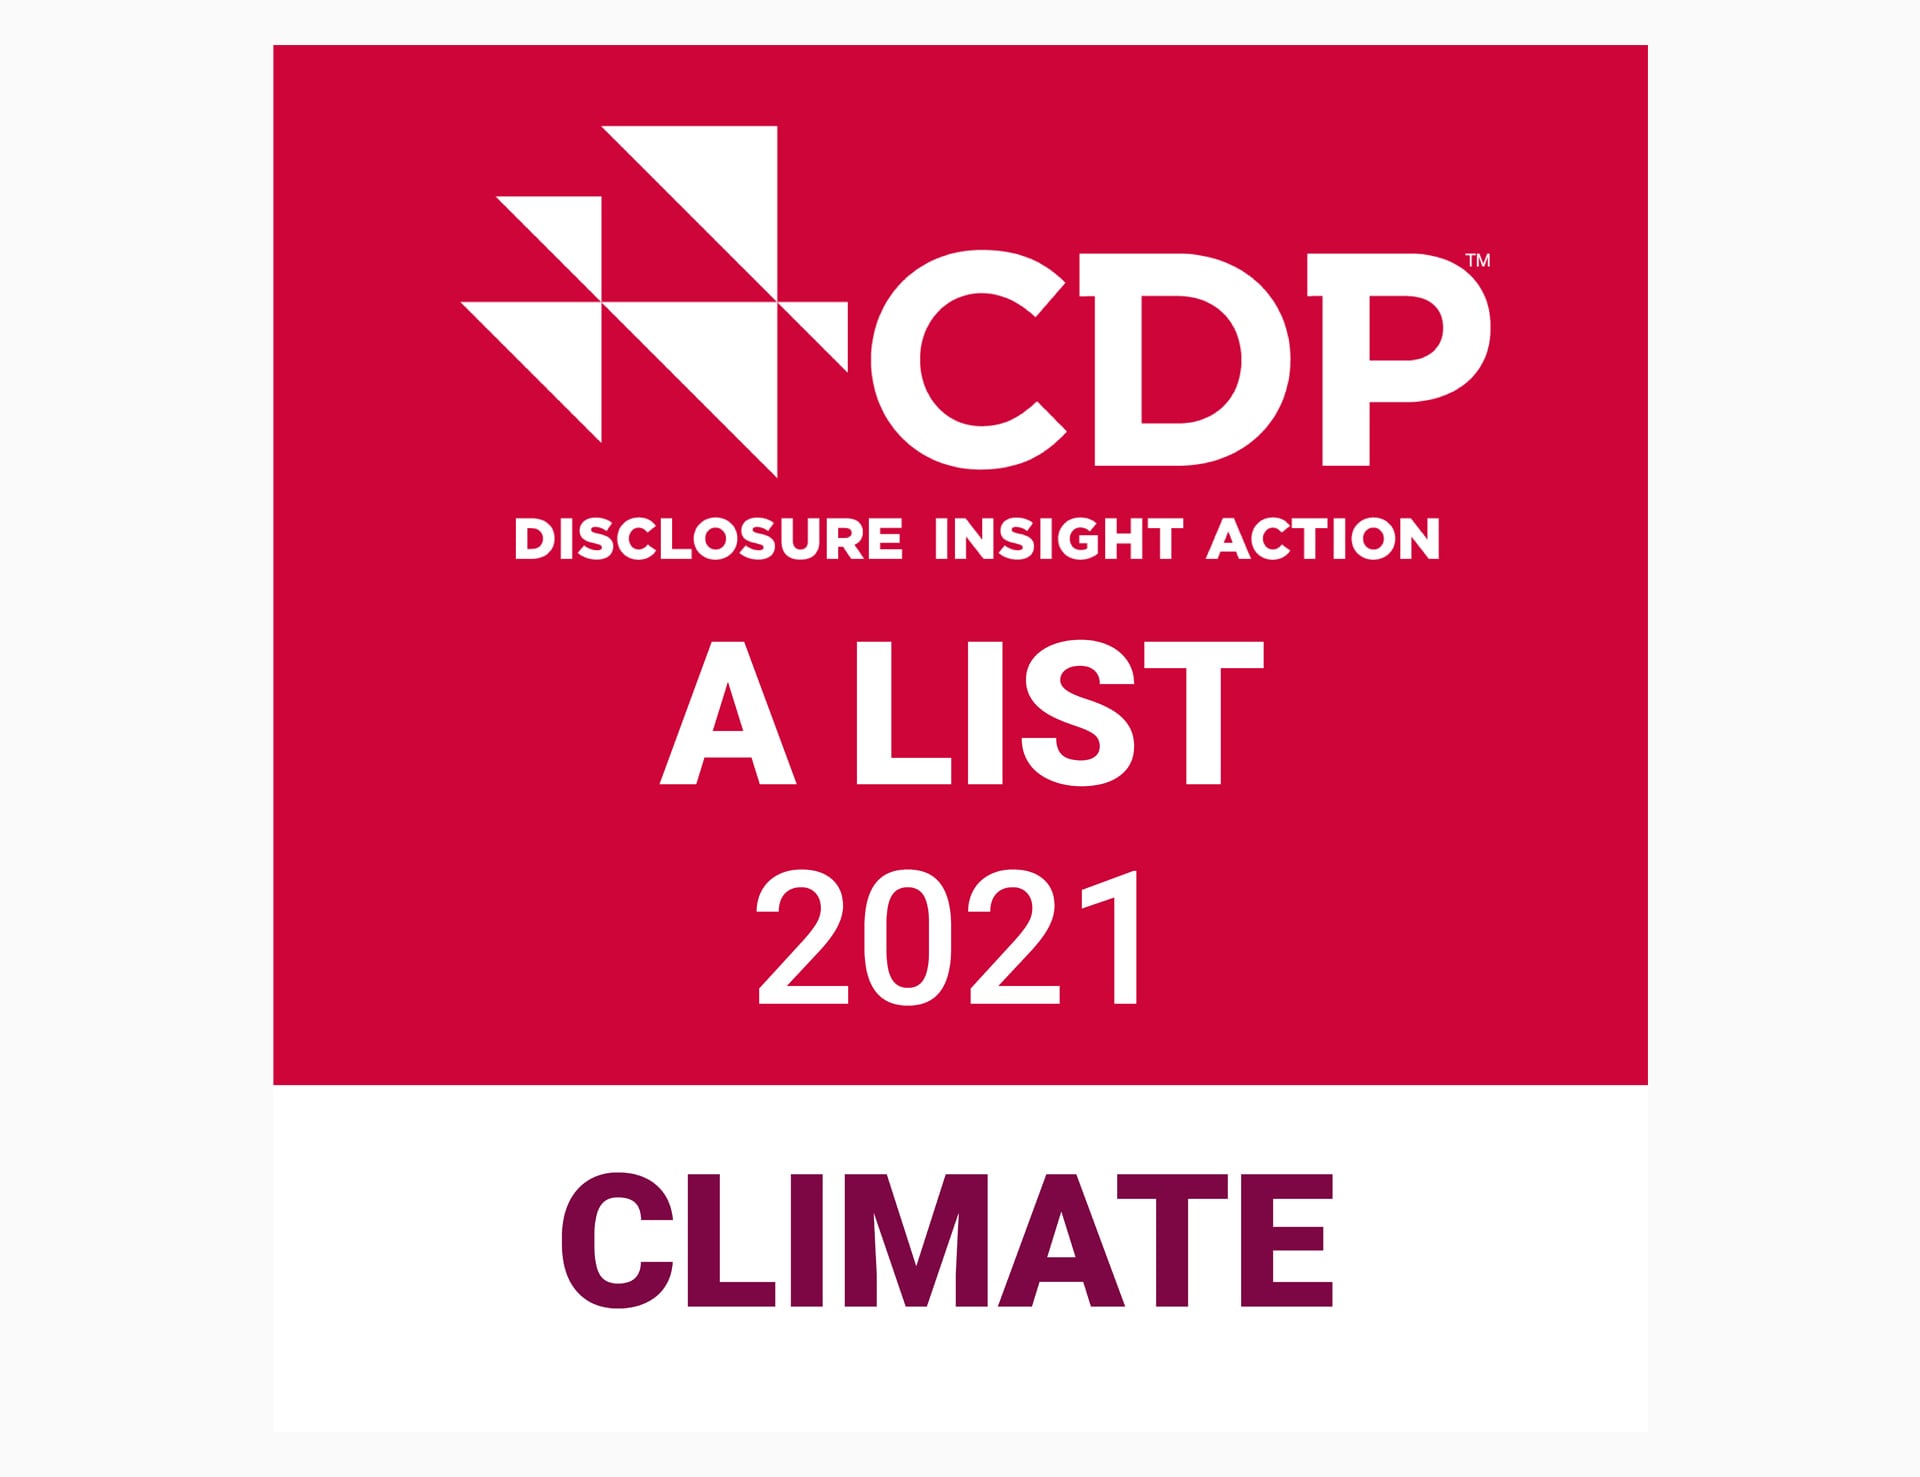 CDP disclosure insight action A list 2021 -logo.